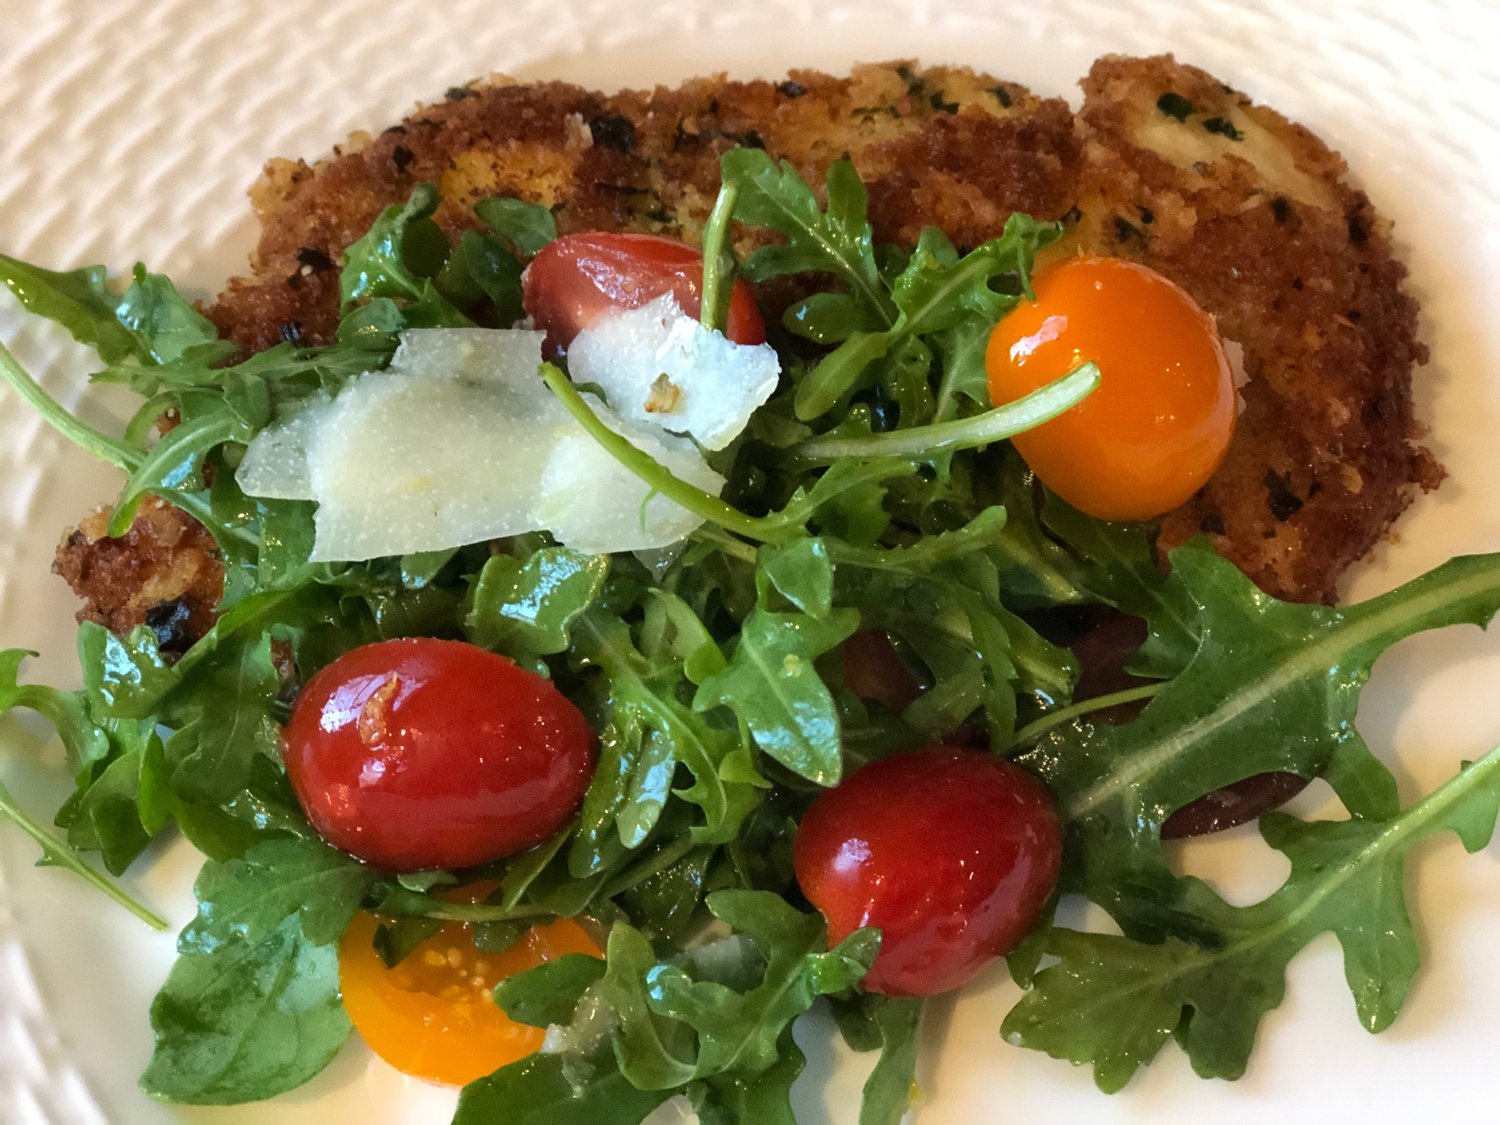 Anne Byrn’s Smashed Chicken Scallopine is lighter than a typical fried-chicken dish and has notes of spring with arugula and cherry tomatoes.